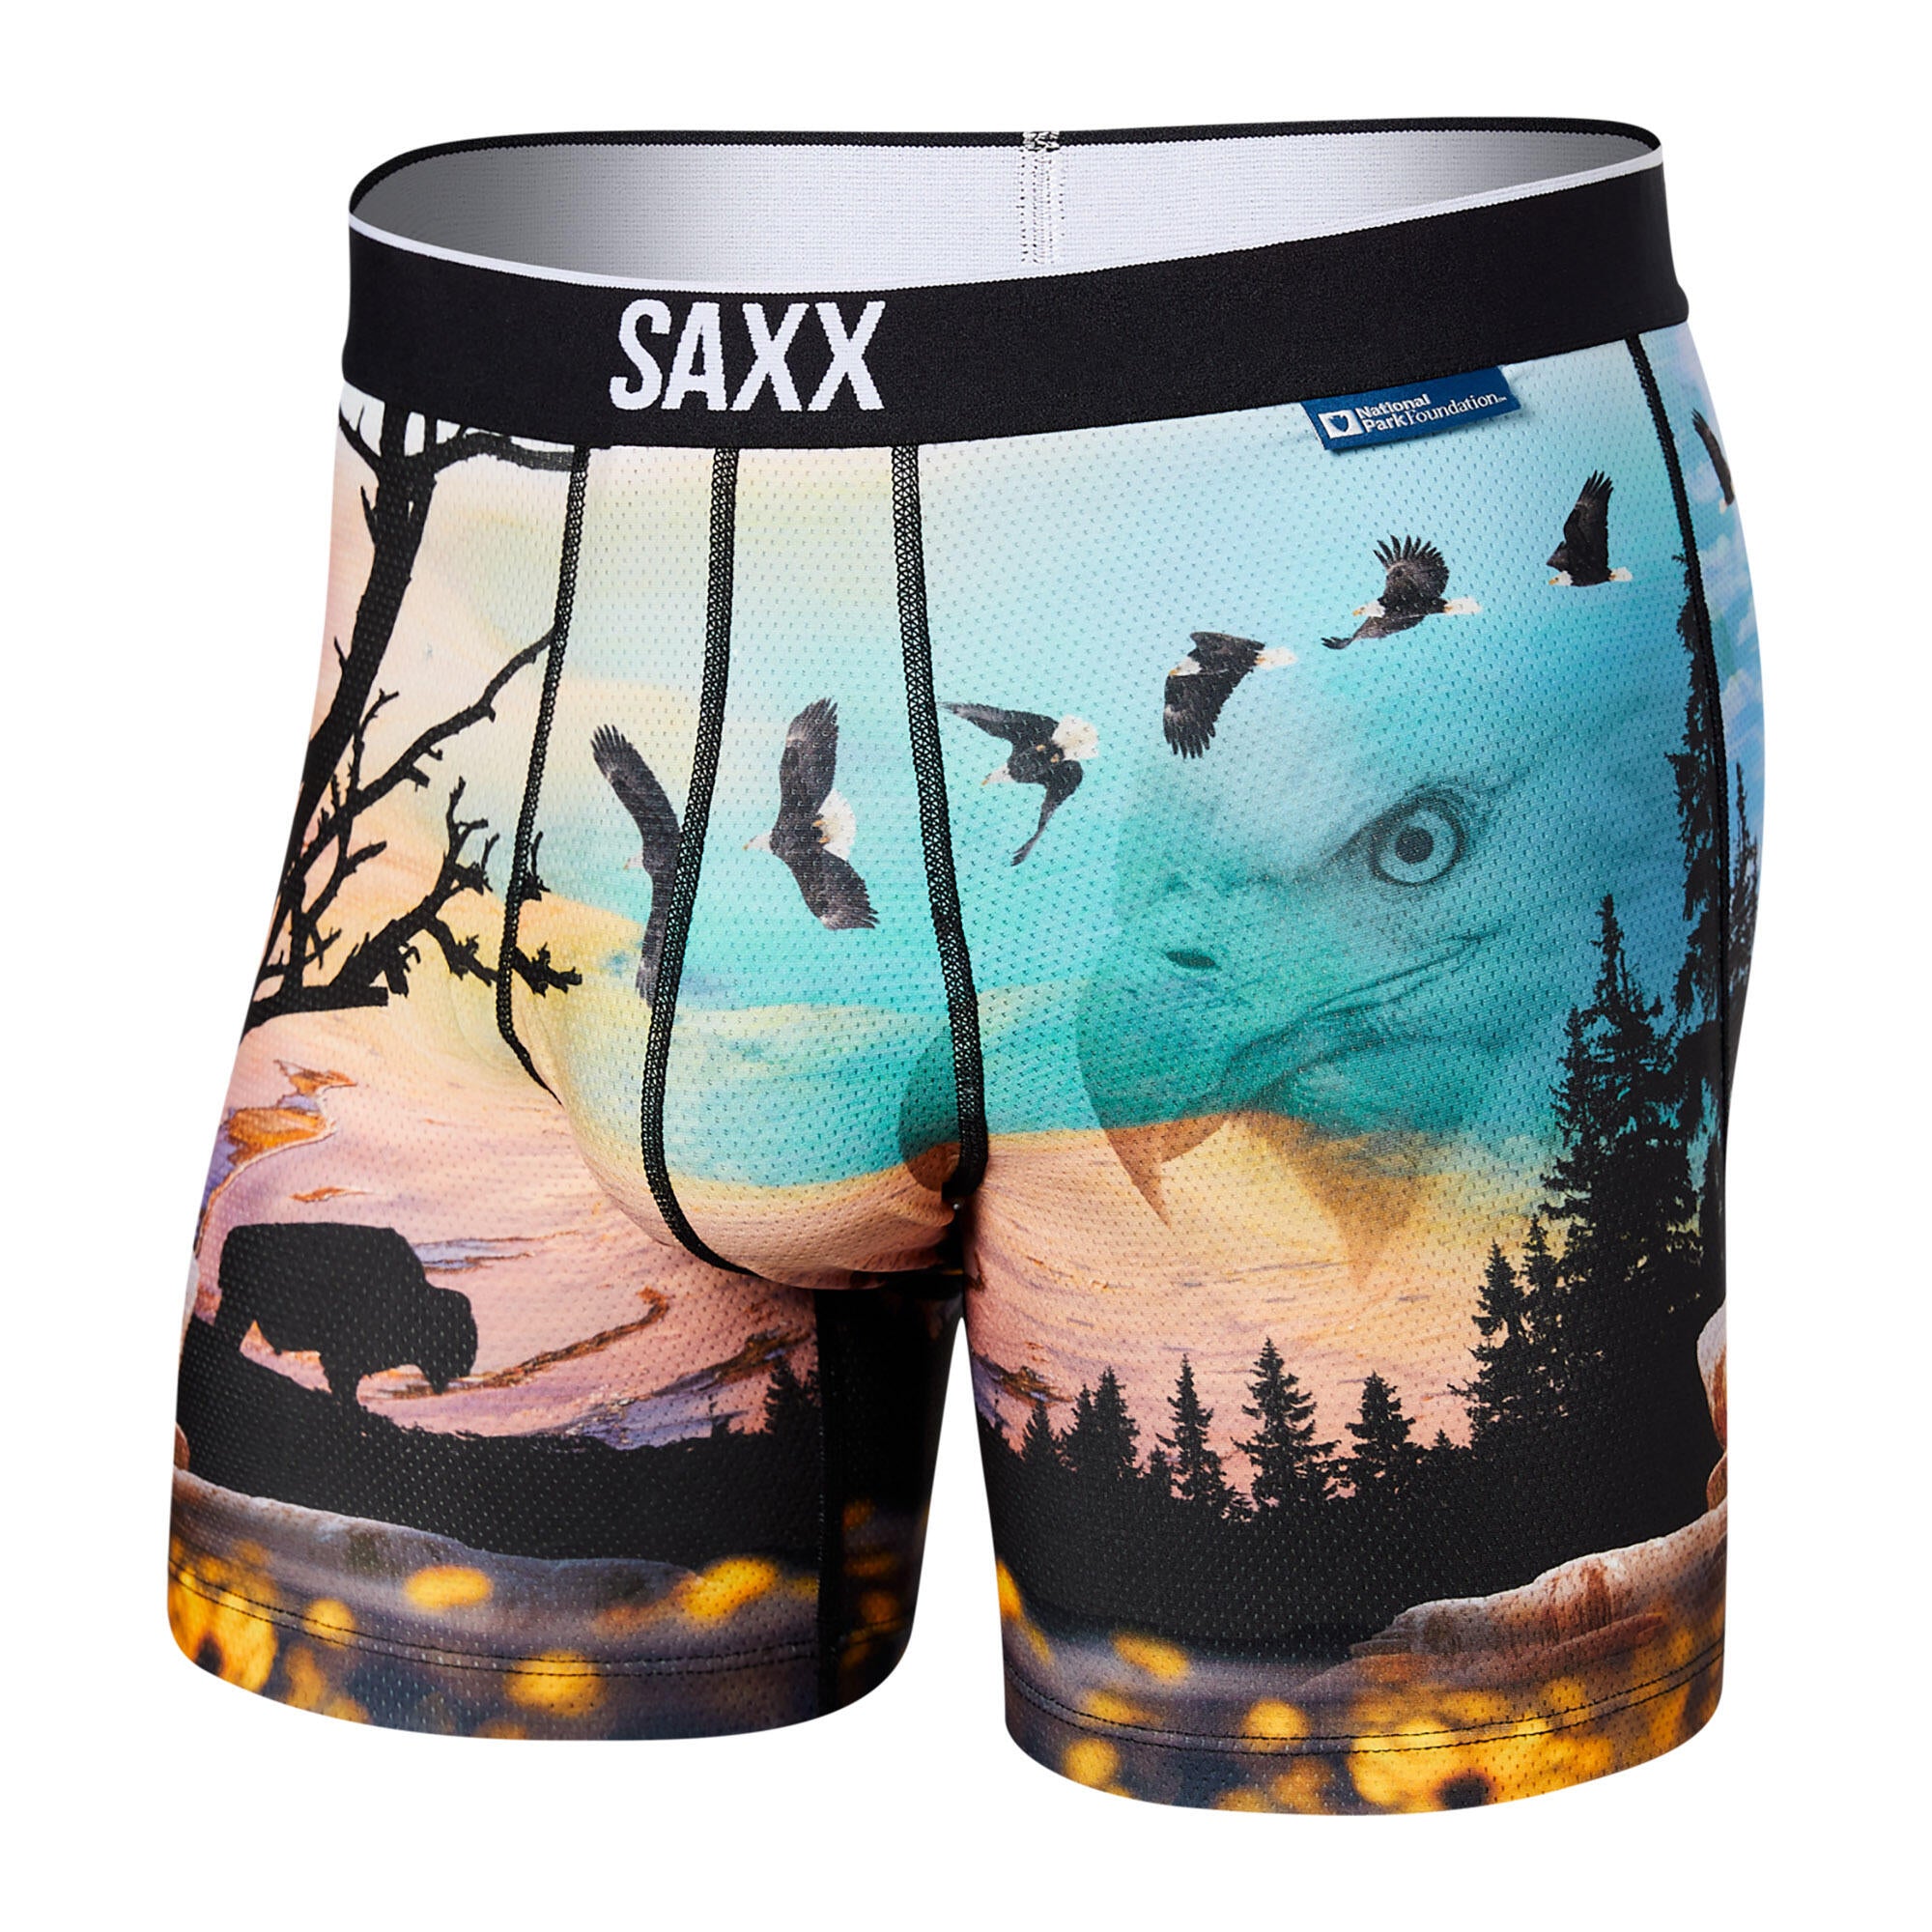 SAXX Underwear Review: What is the BallPark Pouch? — Pants & Socks